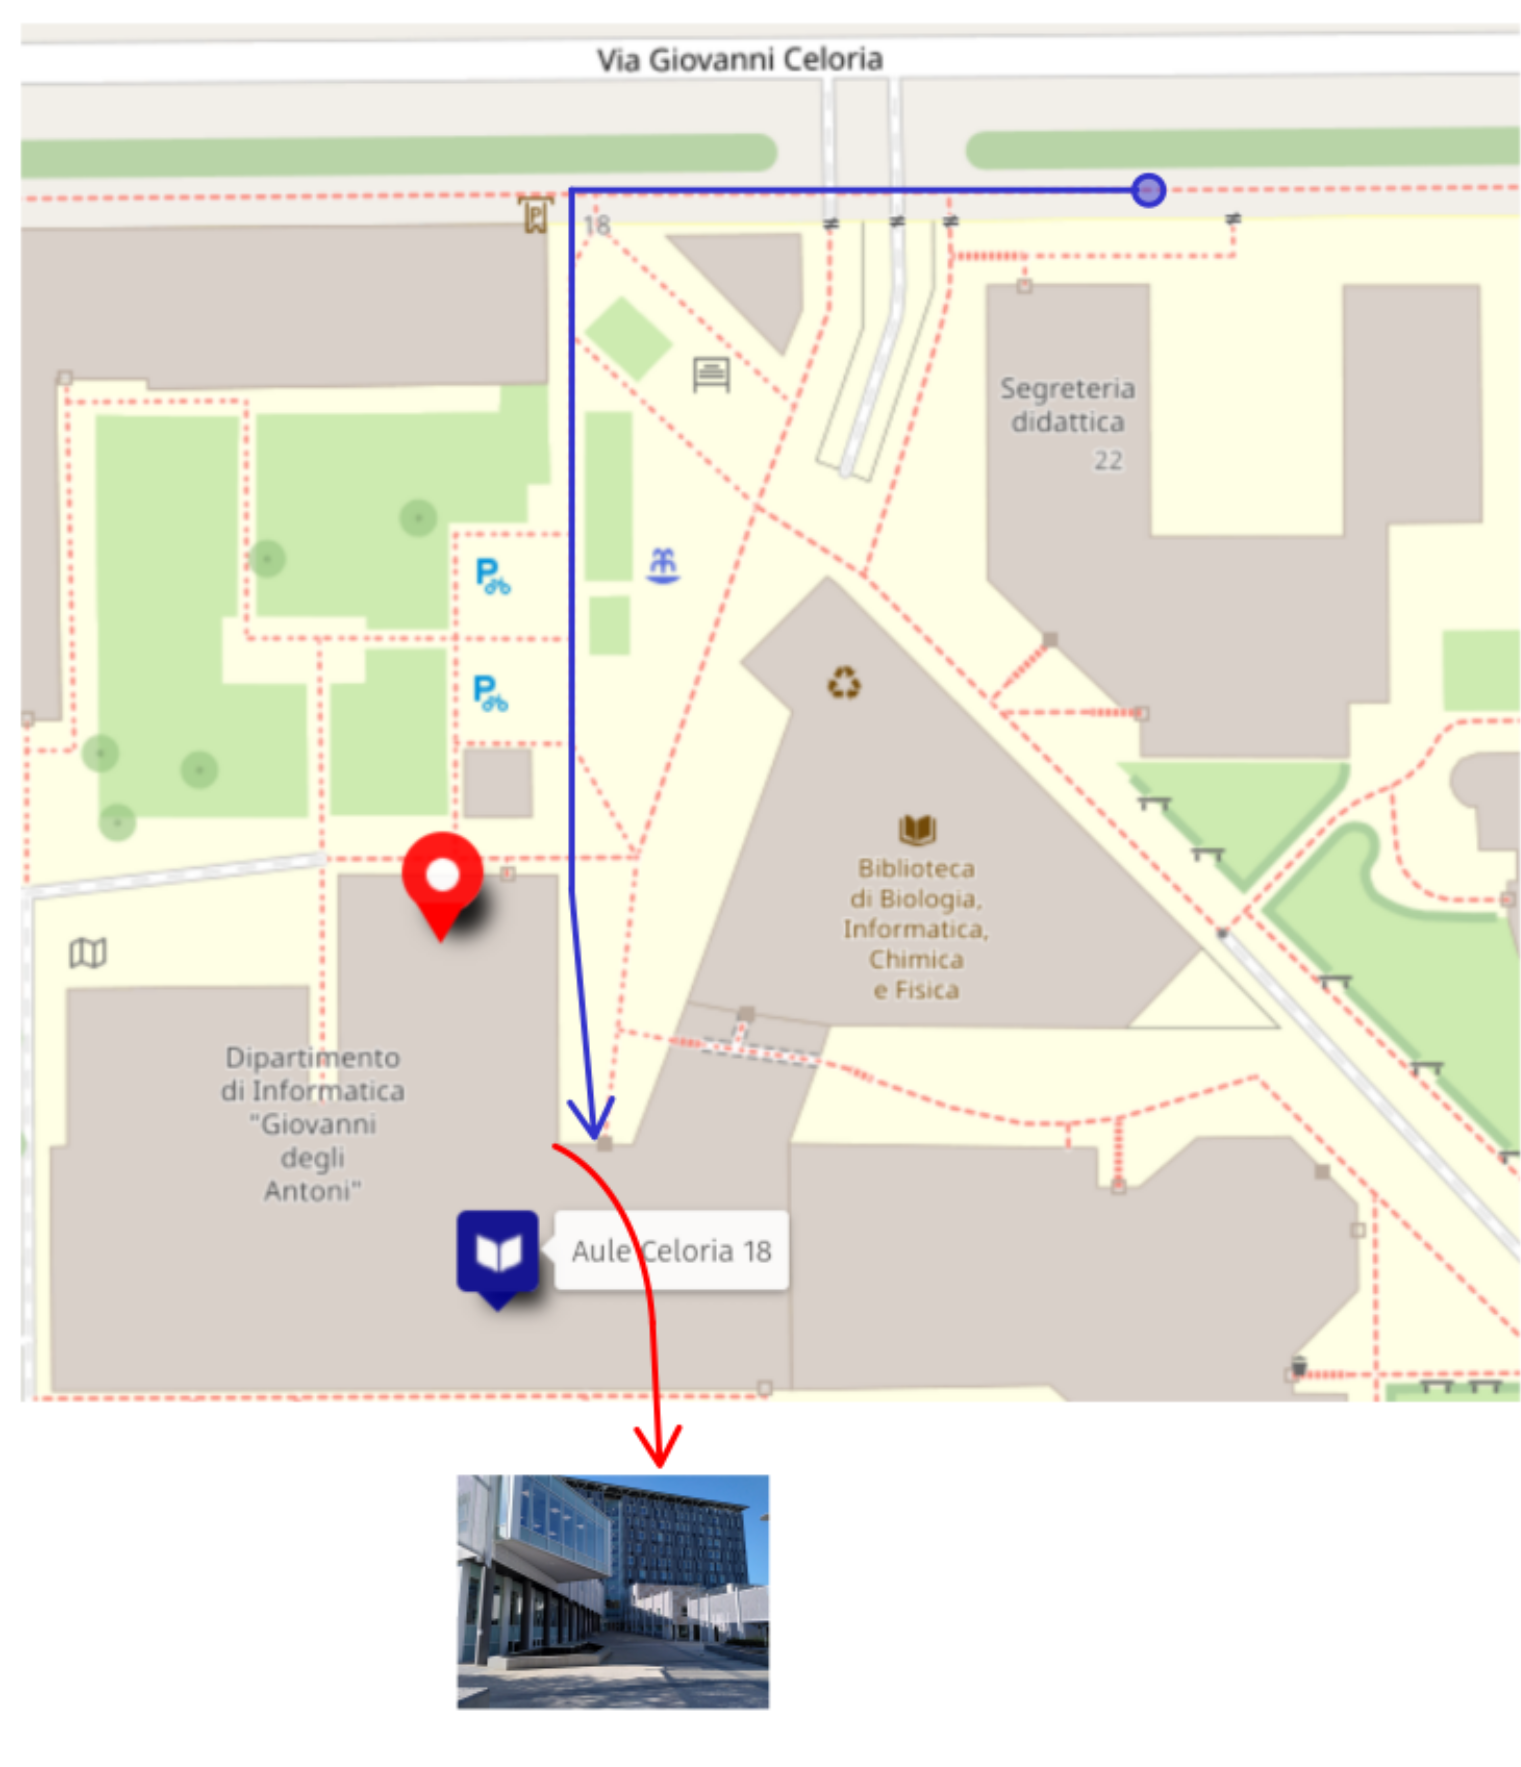 Map to reach the Venue